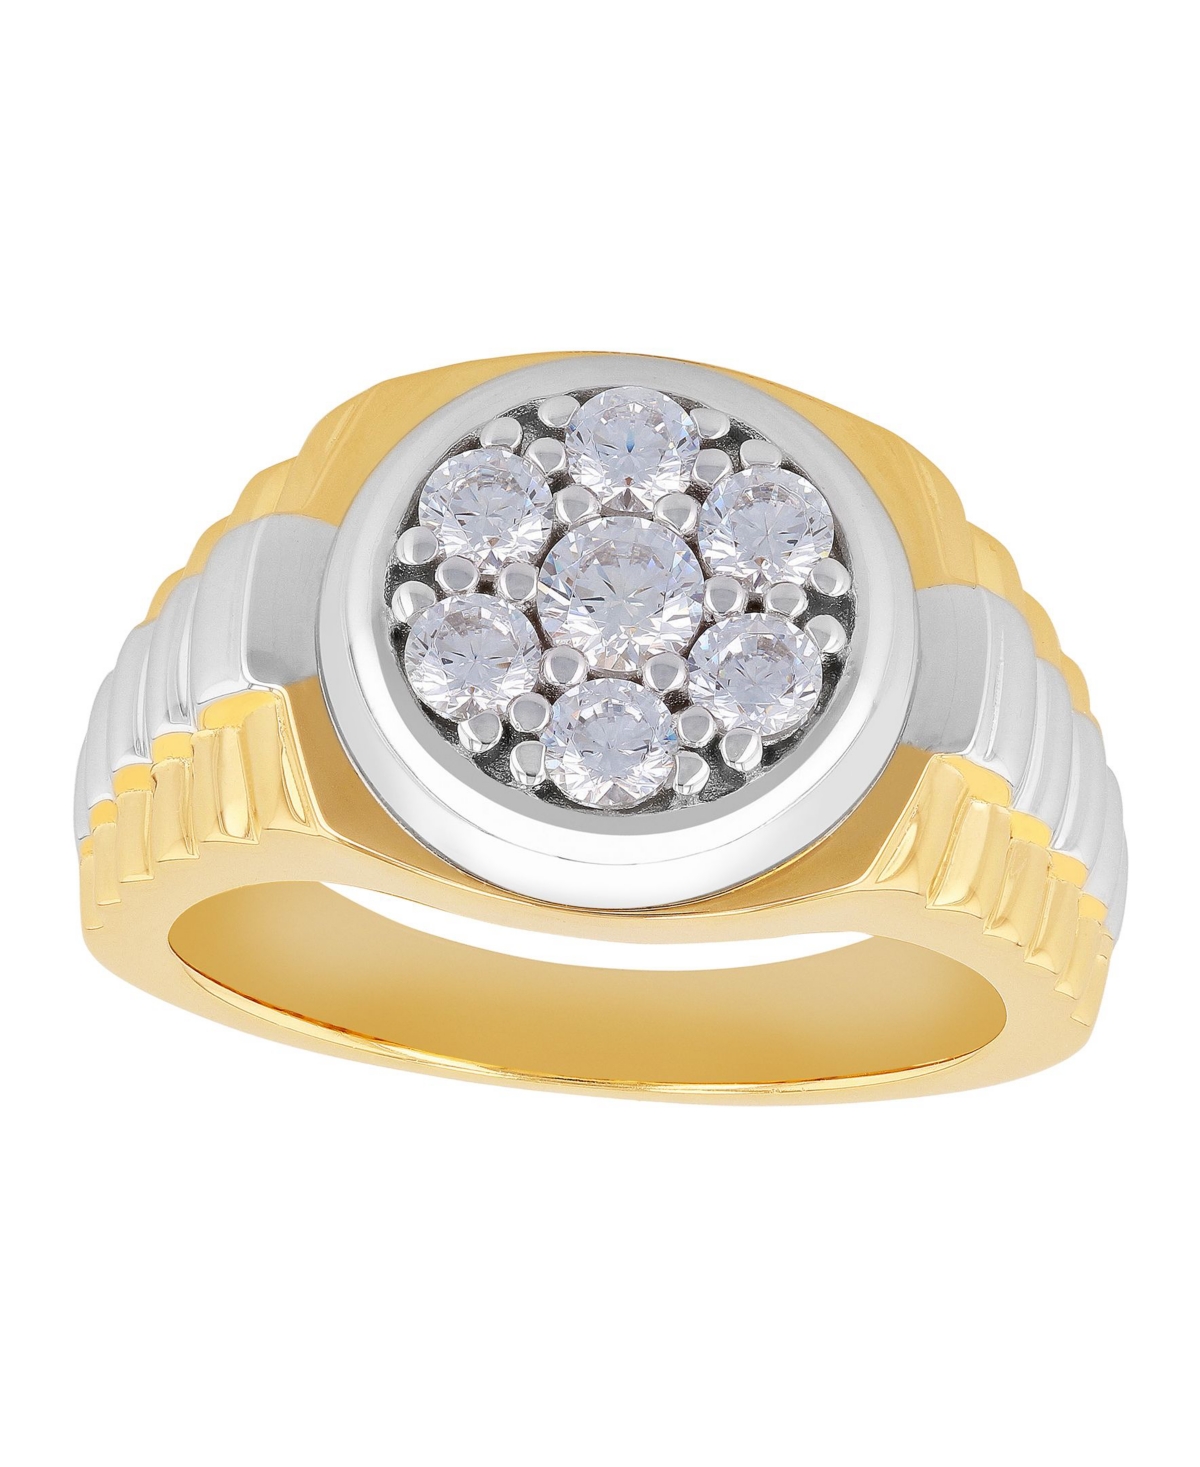 C & c Jewelry Men's Cubic Zirconia 14K Gold Plated in.925 Sterling Silver Gents Ring